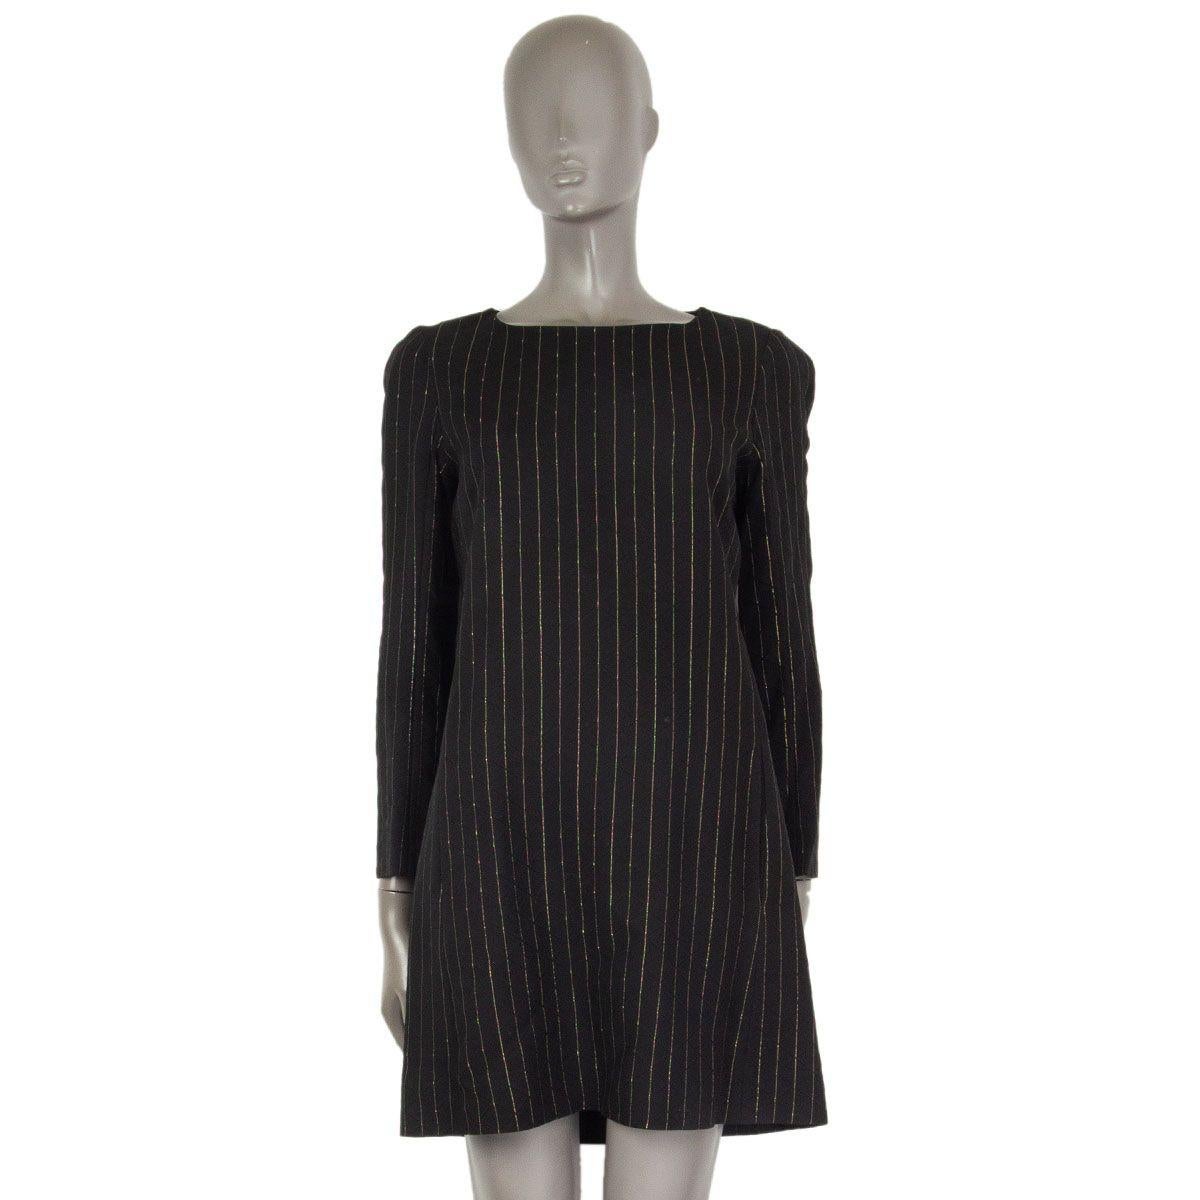 authentic Chloé 3/4 sleeve pinstripe shift dress in black silk (53%), wool (46%) and polyester (1%) with gold stitching and a round neck-line. Closes with a zipper on the back and has slit pockets on the front. Lined in black acetate (70%) and silk